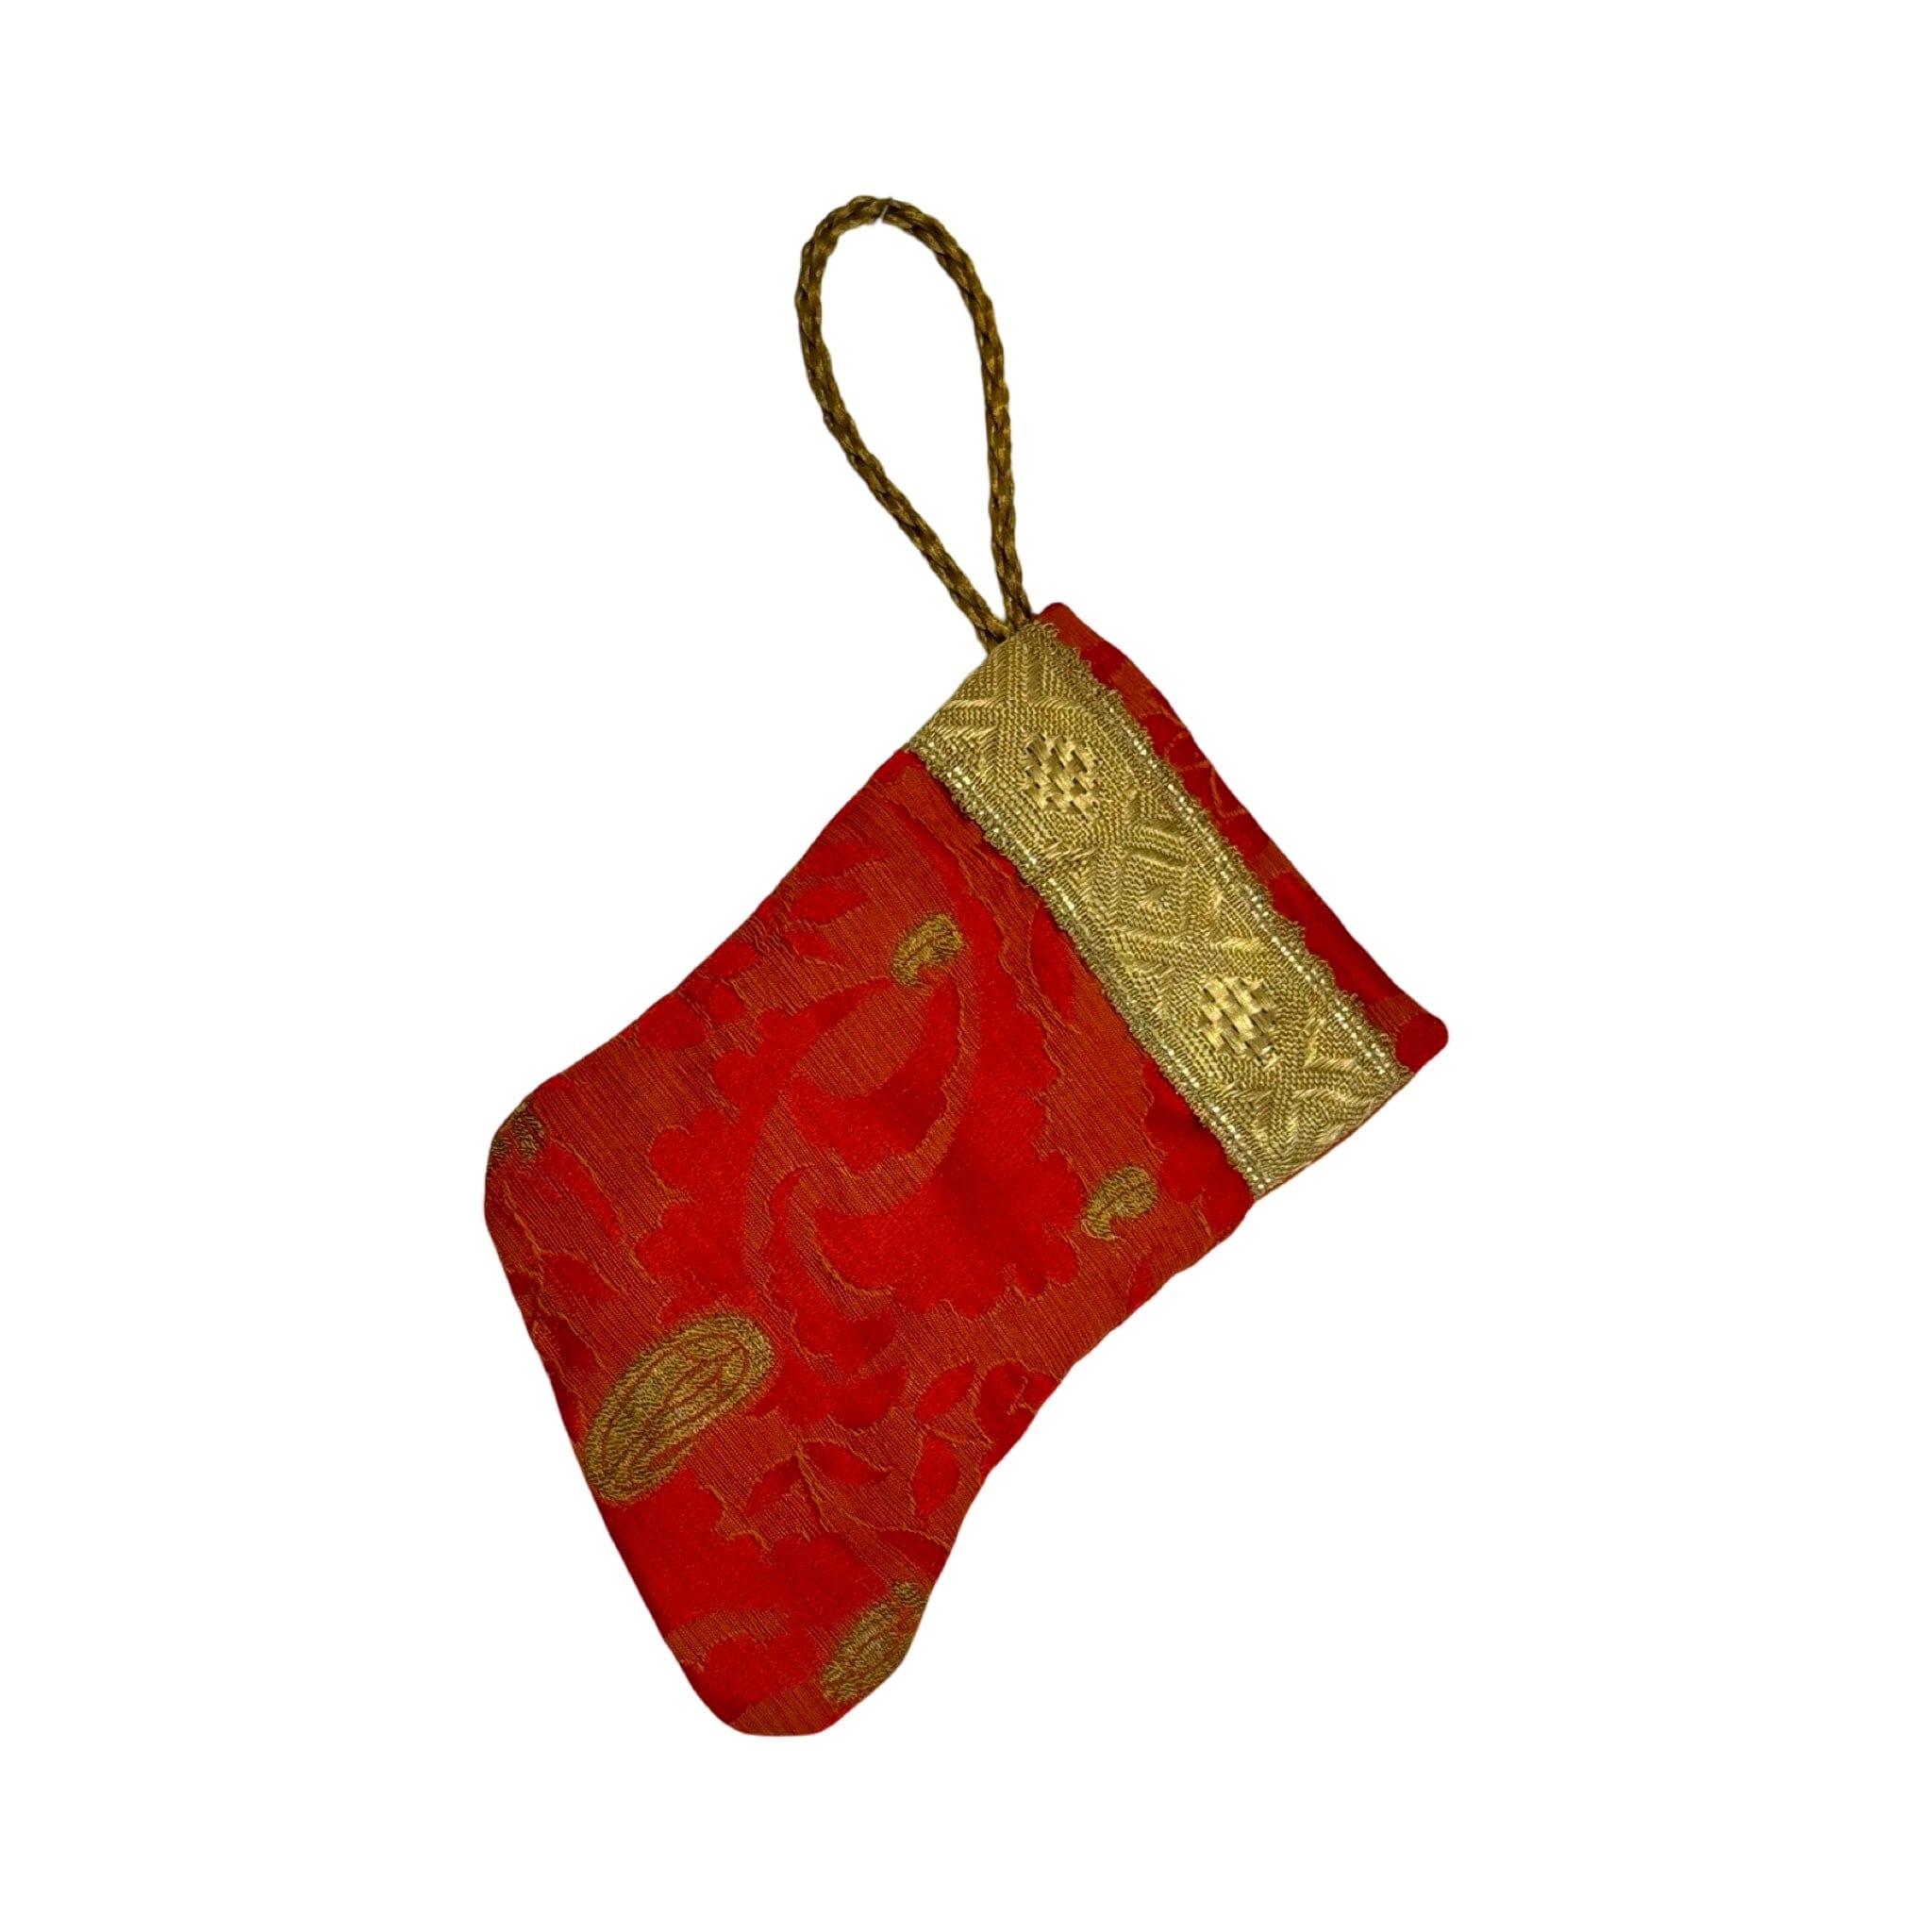 Handmade Mini Stocking Made From Vintage Fabric and Trims- Red and Gold Ornament B. Viz Design K 